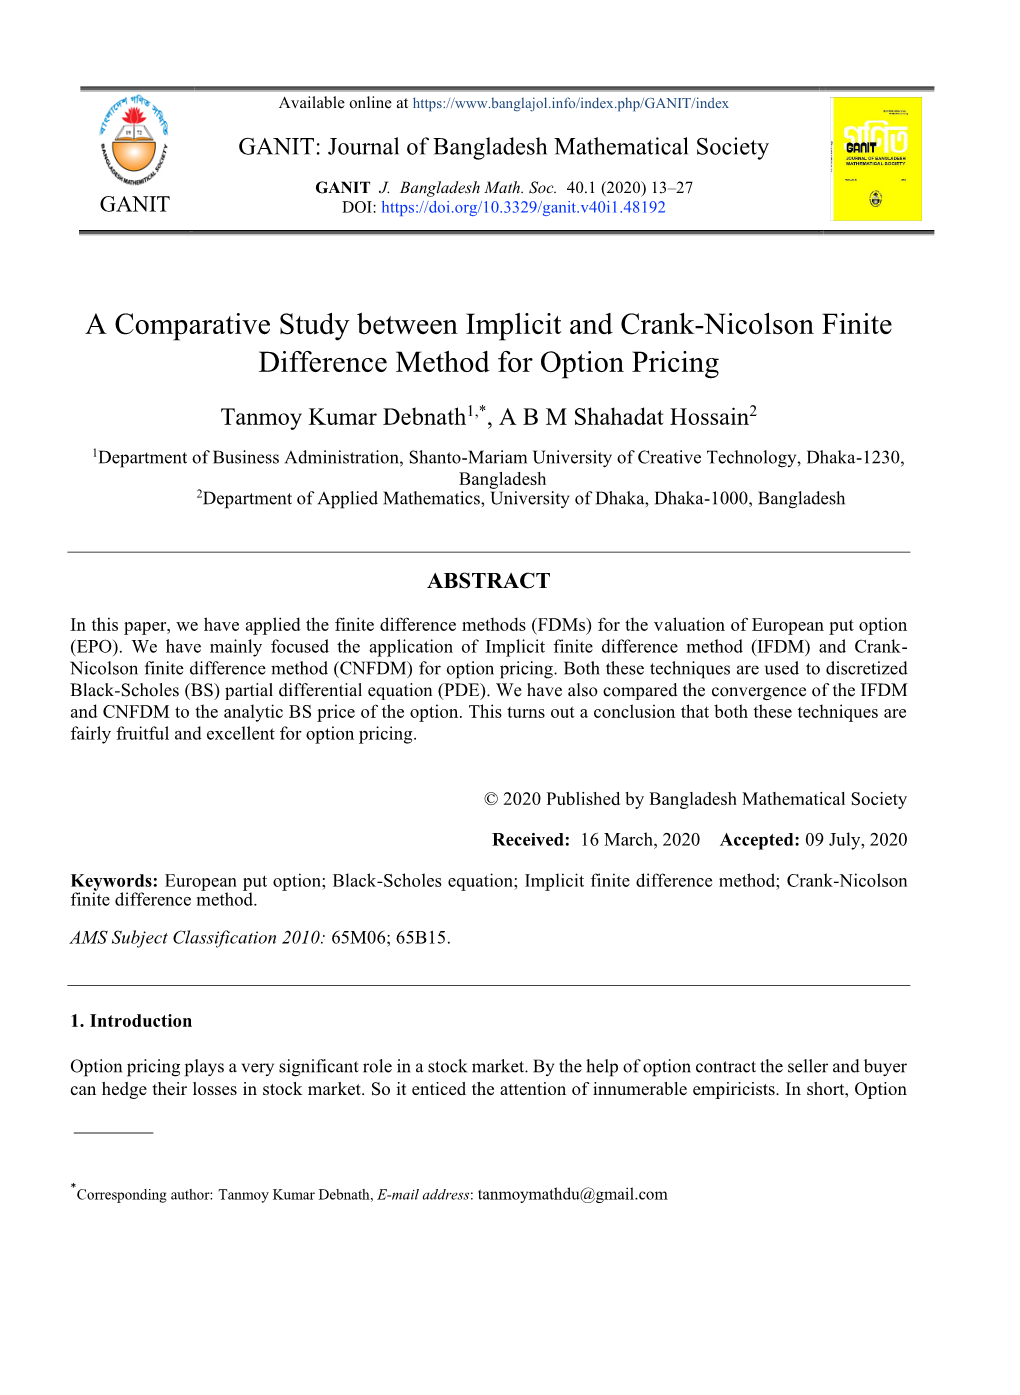 A Comparative Study Between Implicit and Crank-Nicolson Finite Difference Method for Option Pricing